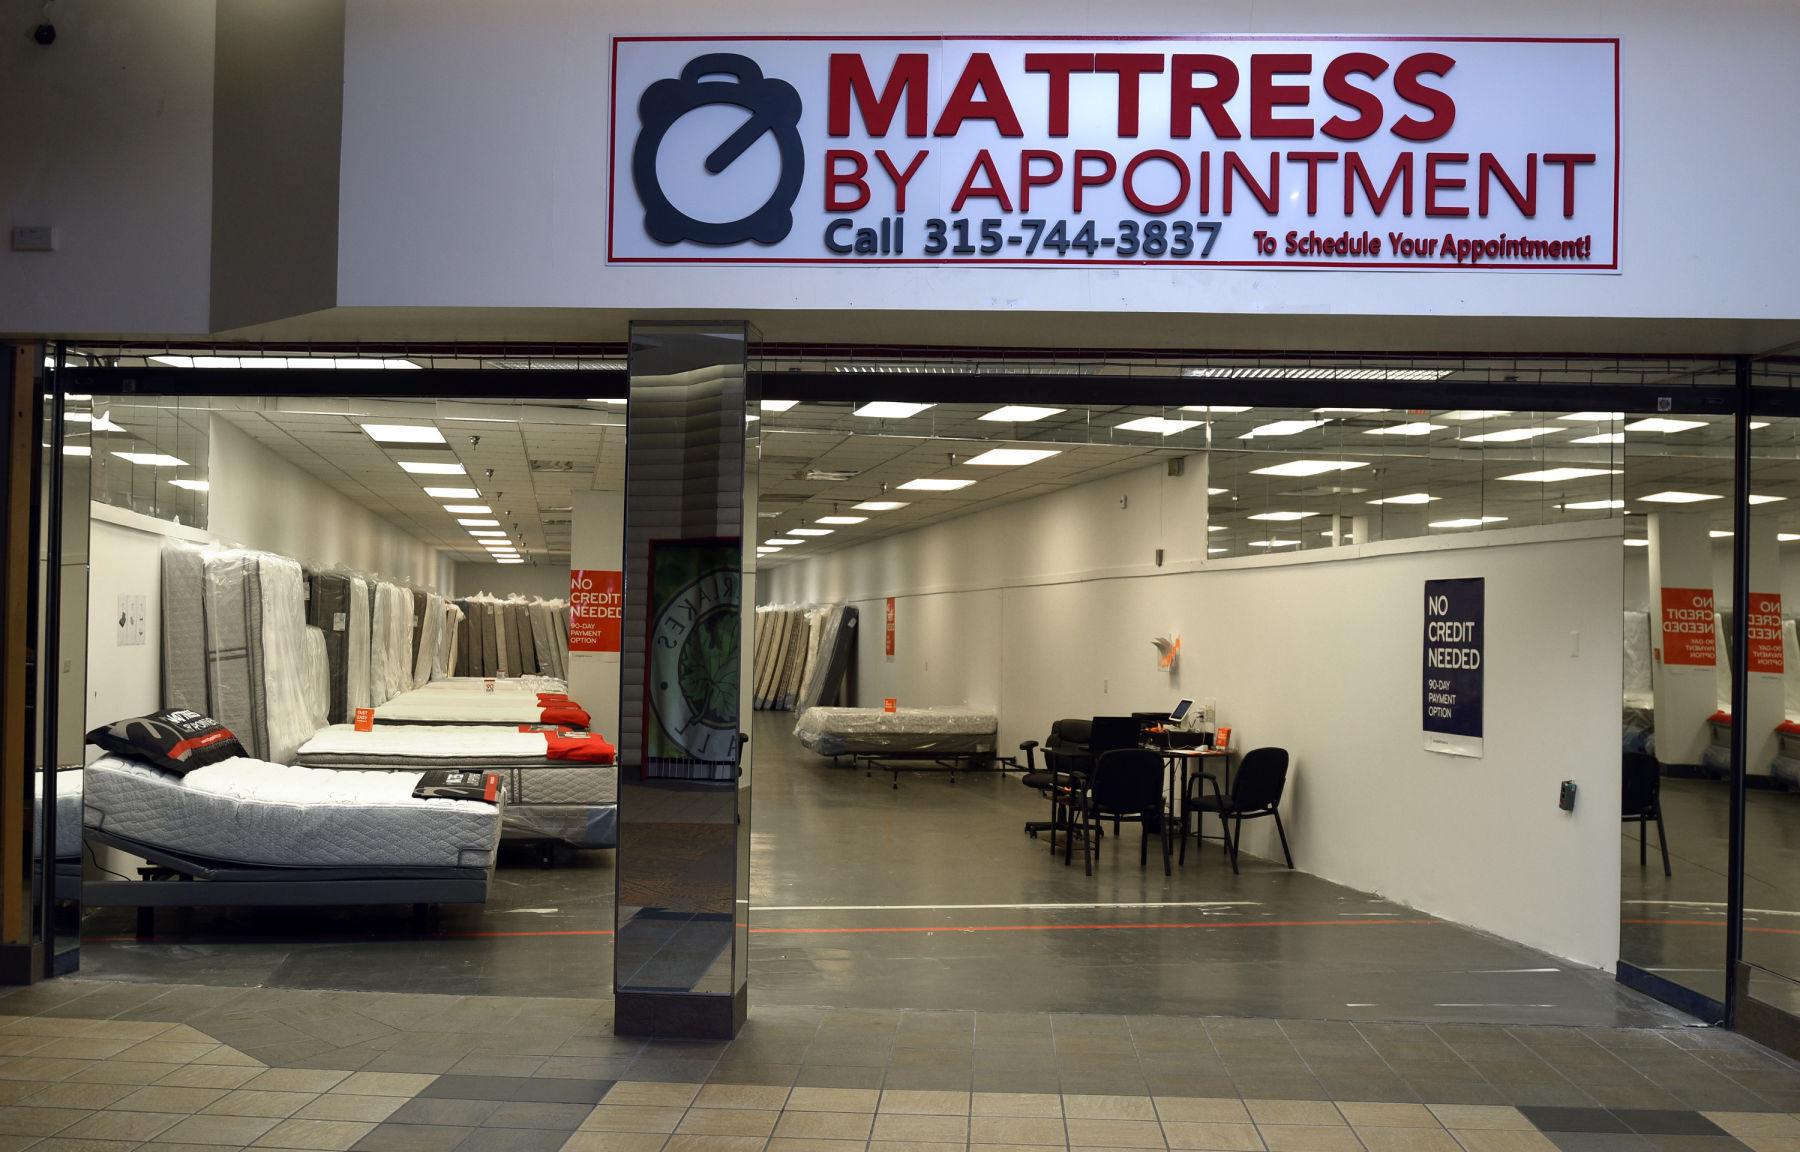 are mattress firm stores franchises